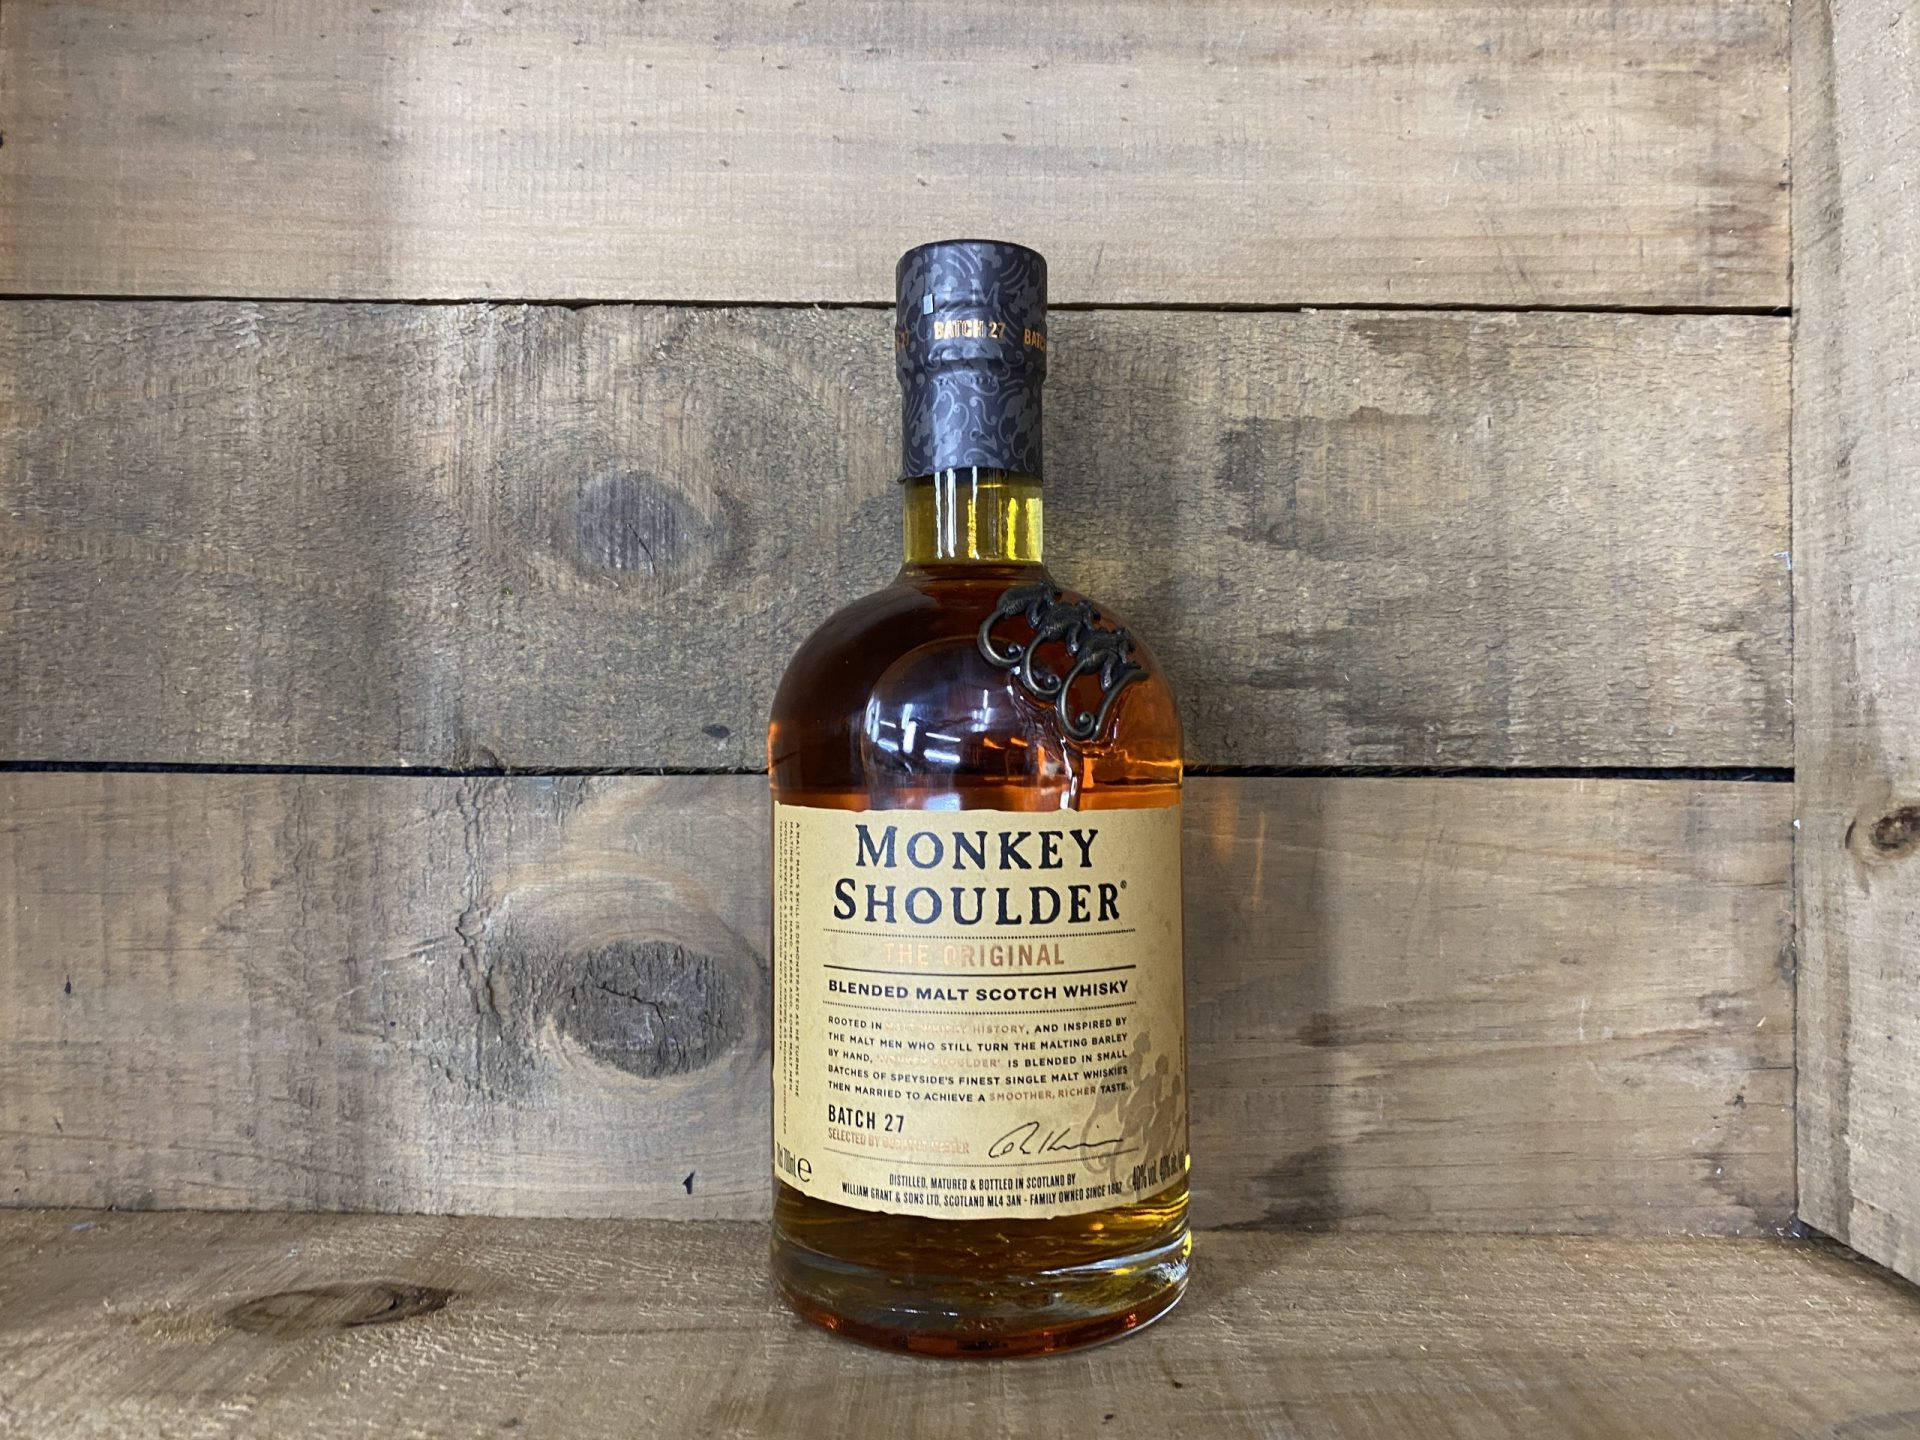 "Exquisite Monkey Shoulder Scotch Resting in a Rustic Wooden Crate" Wallpaper